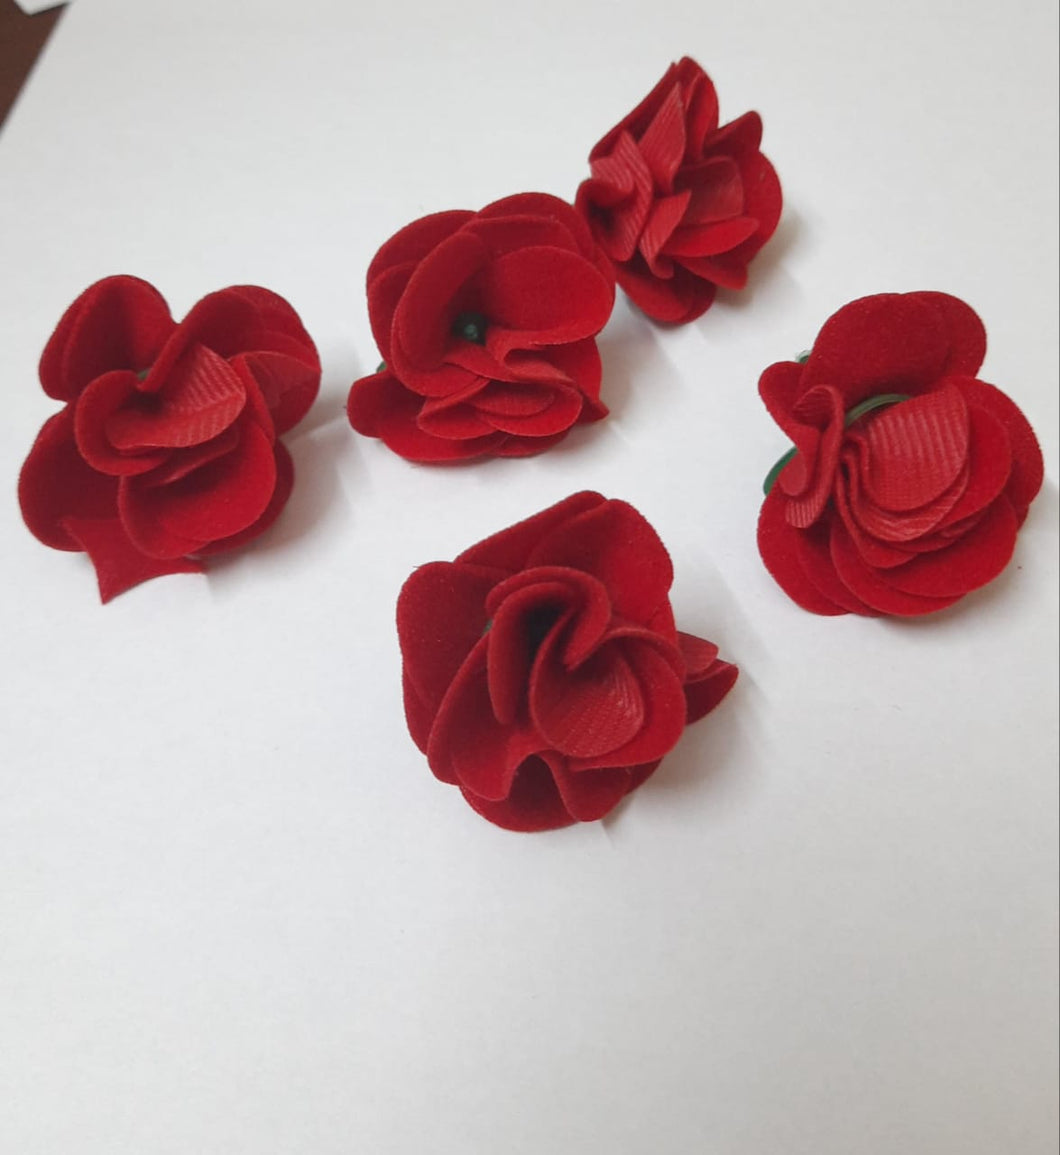 Small Size Fabric Red Rose Artificial Flower for Art and Craft